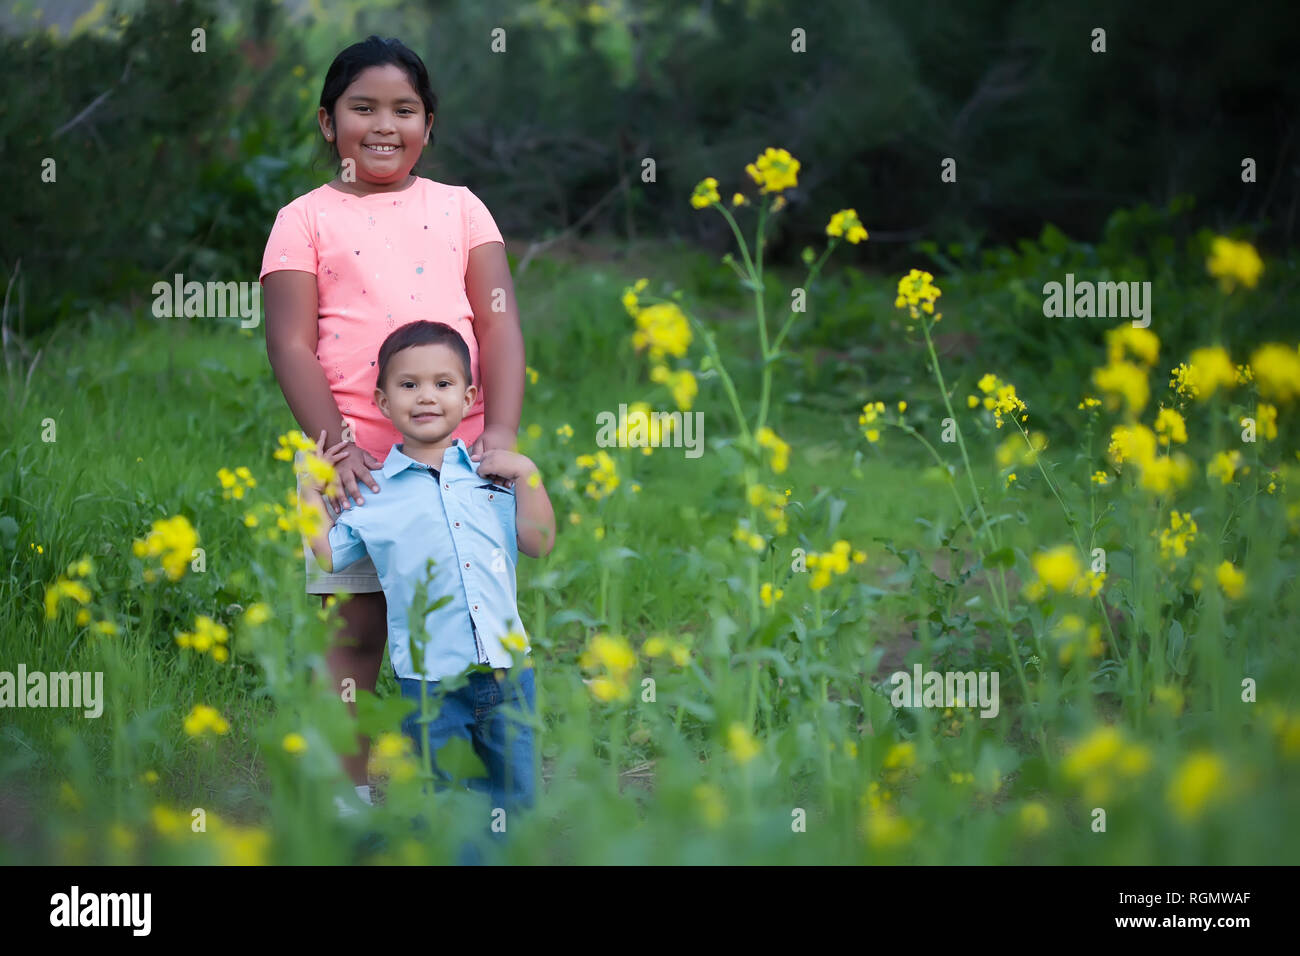 A big sister standing behind her little brother in a field of yellow flowers and green wild grass. Stock Photo